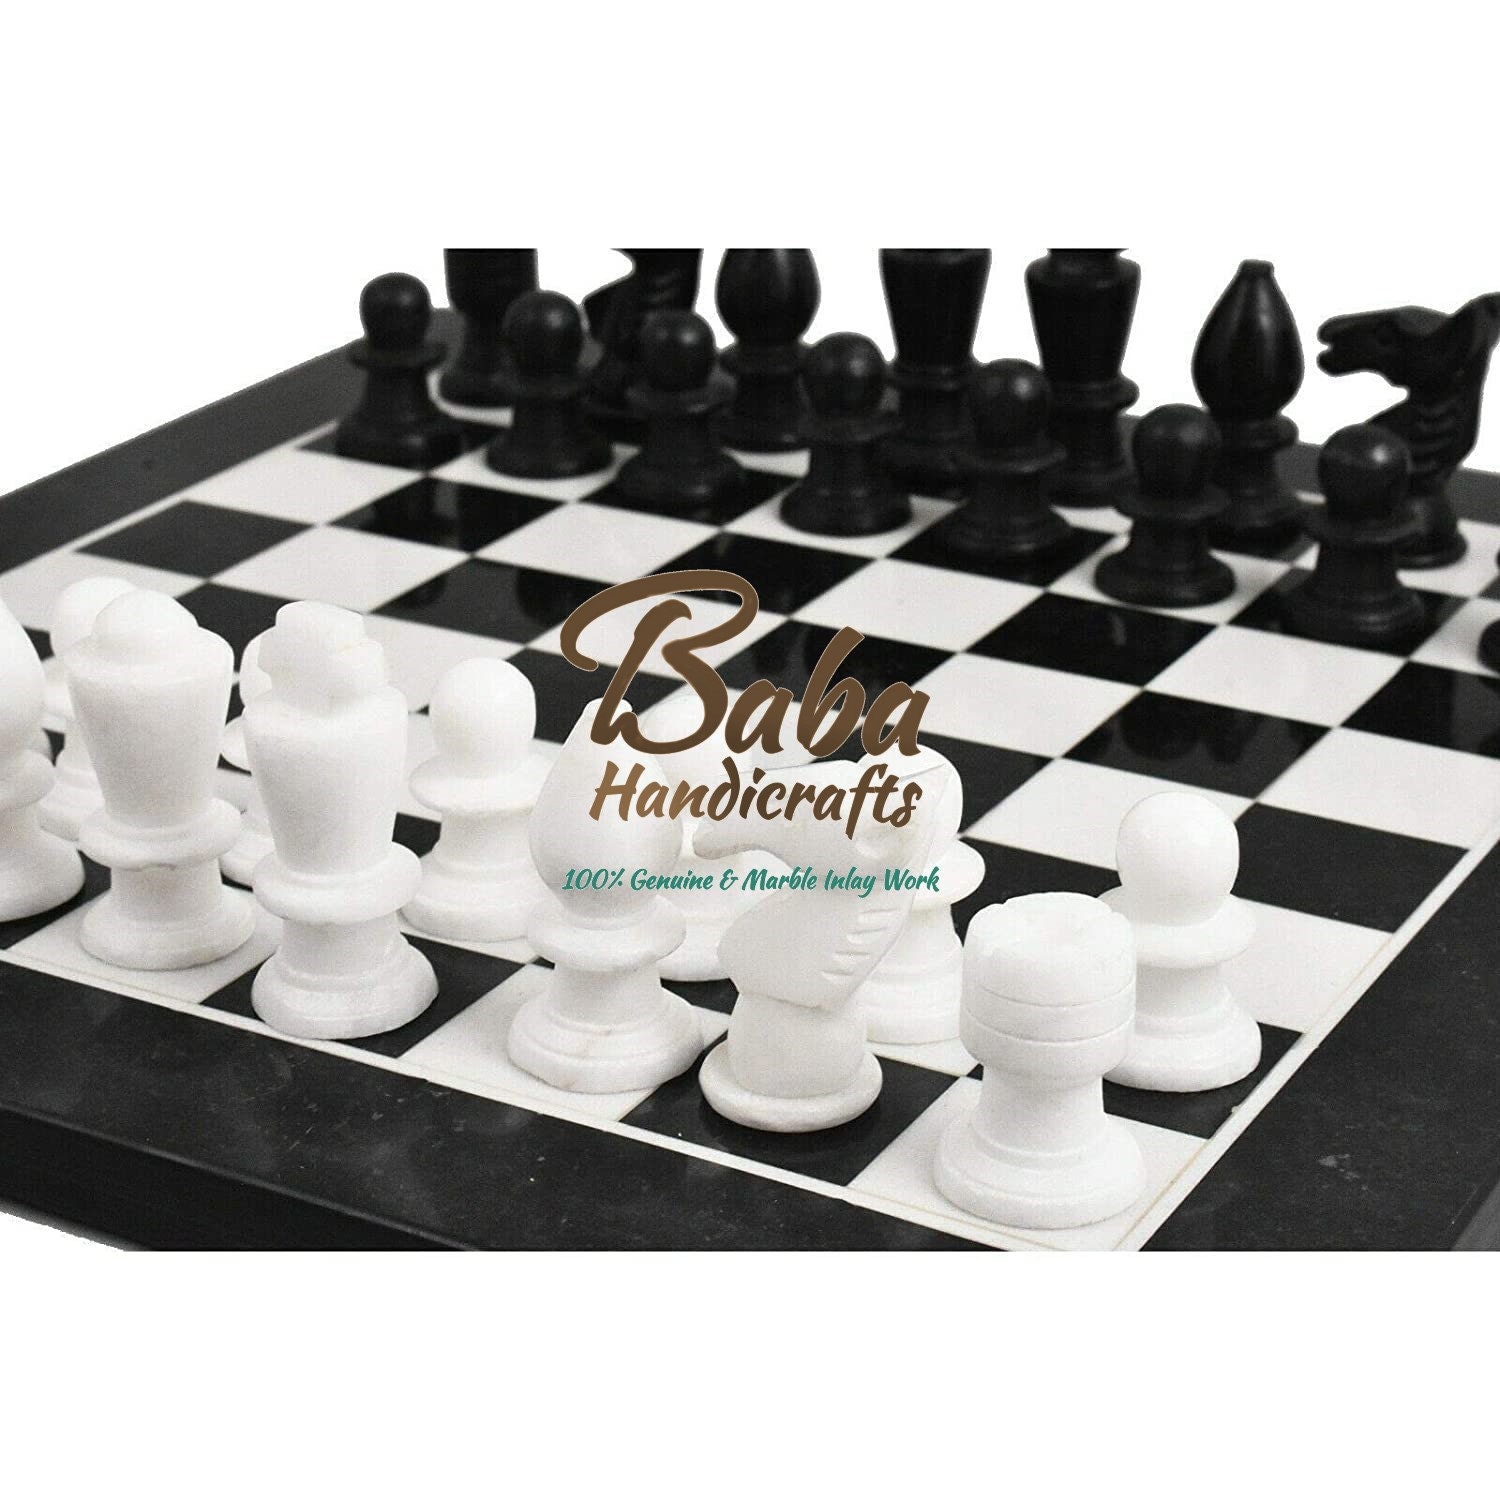 Luxury Big Wooden Chess Set with 2 drawers 23.6 inch Unique Handmade Board  Game